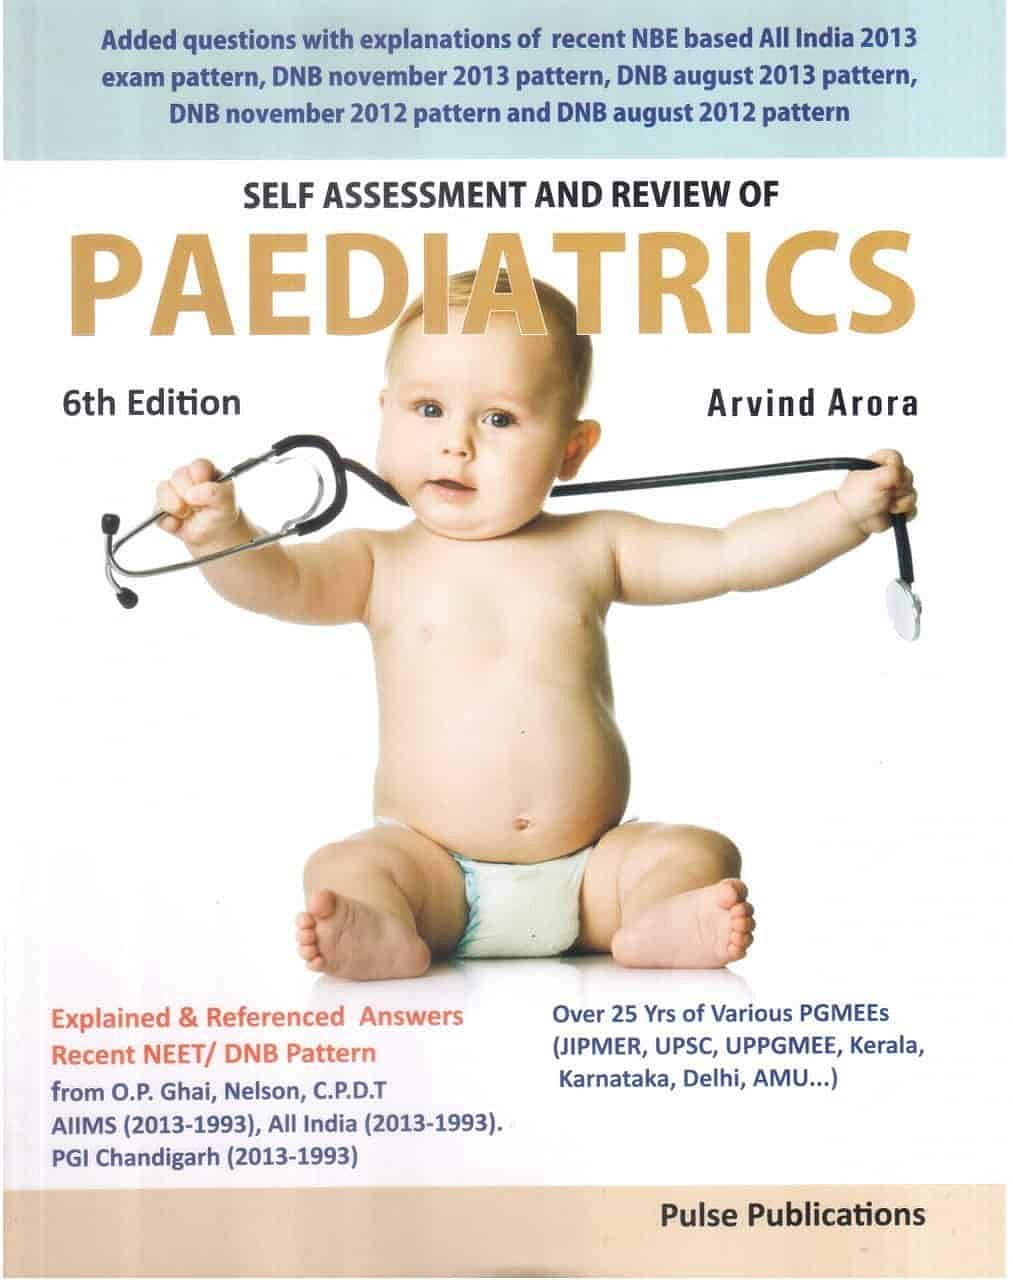 Self-Assessment and Review of Paediatrics by Arvind Arora